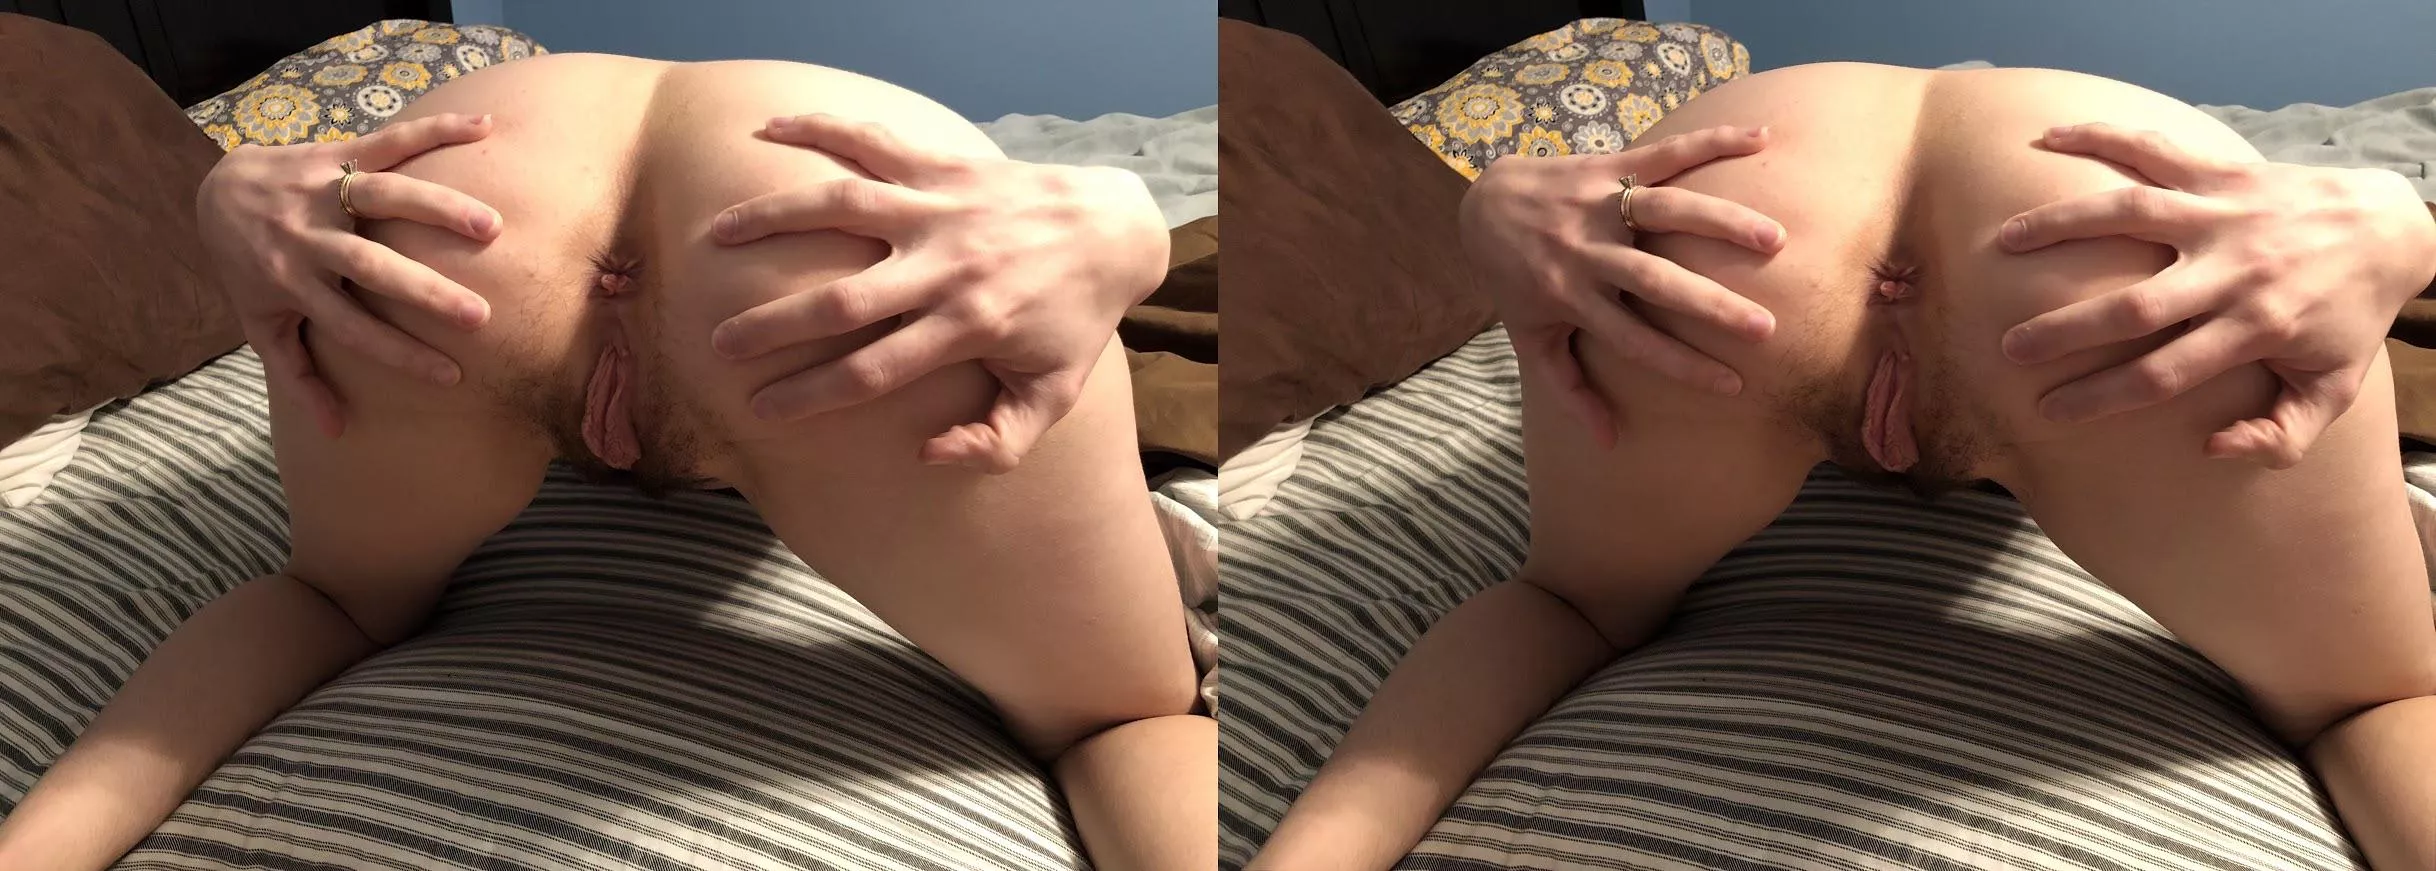 Playing around with a cross view app, decided to take some pics of my wife.  nudes by CBZIII